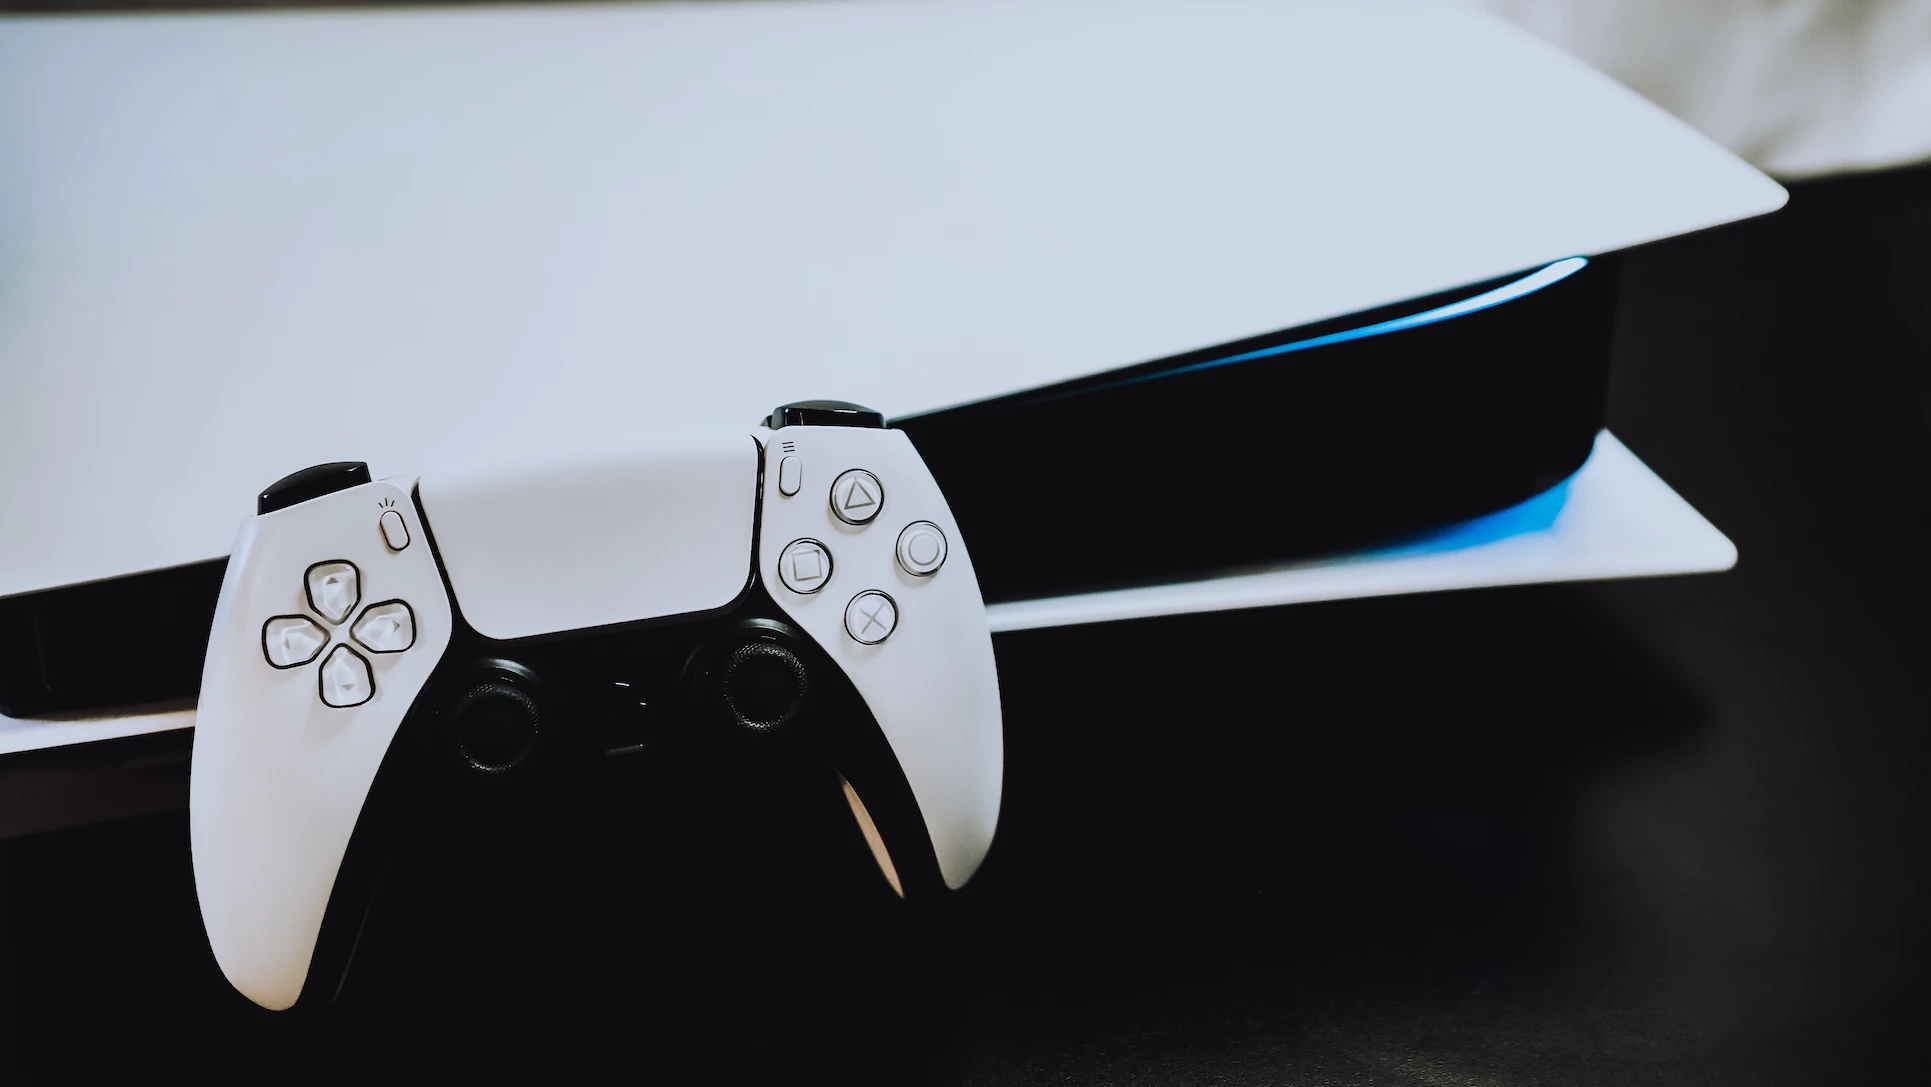 Sony's rival expects PlayStation 5 Slim release in 2023 and